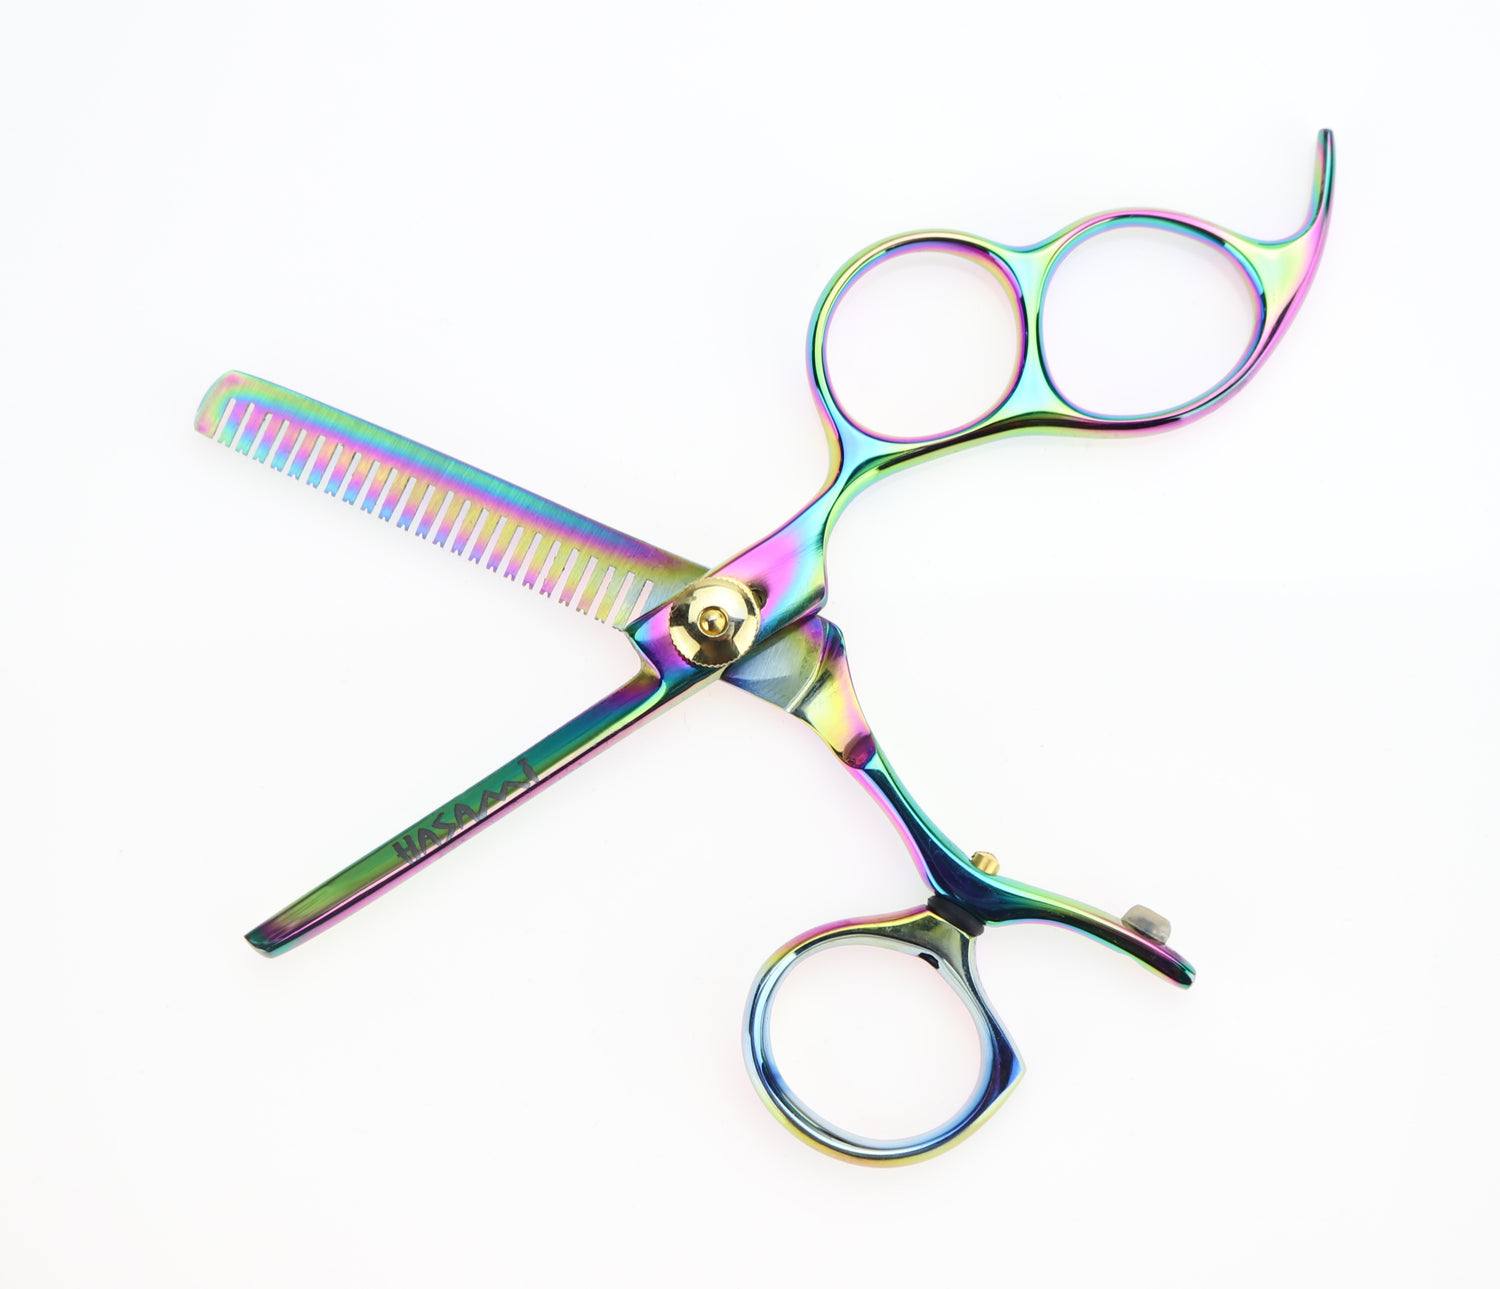 Professional Hair Thinning Scissors, Extra Sharp Hairdressing